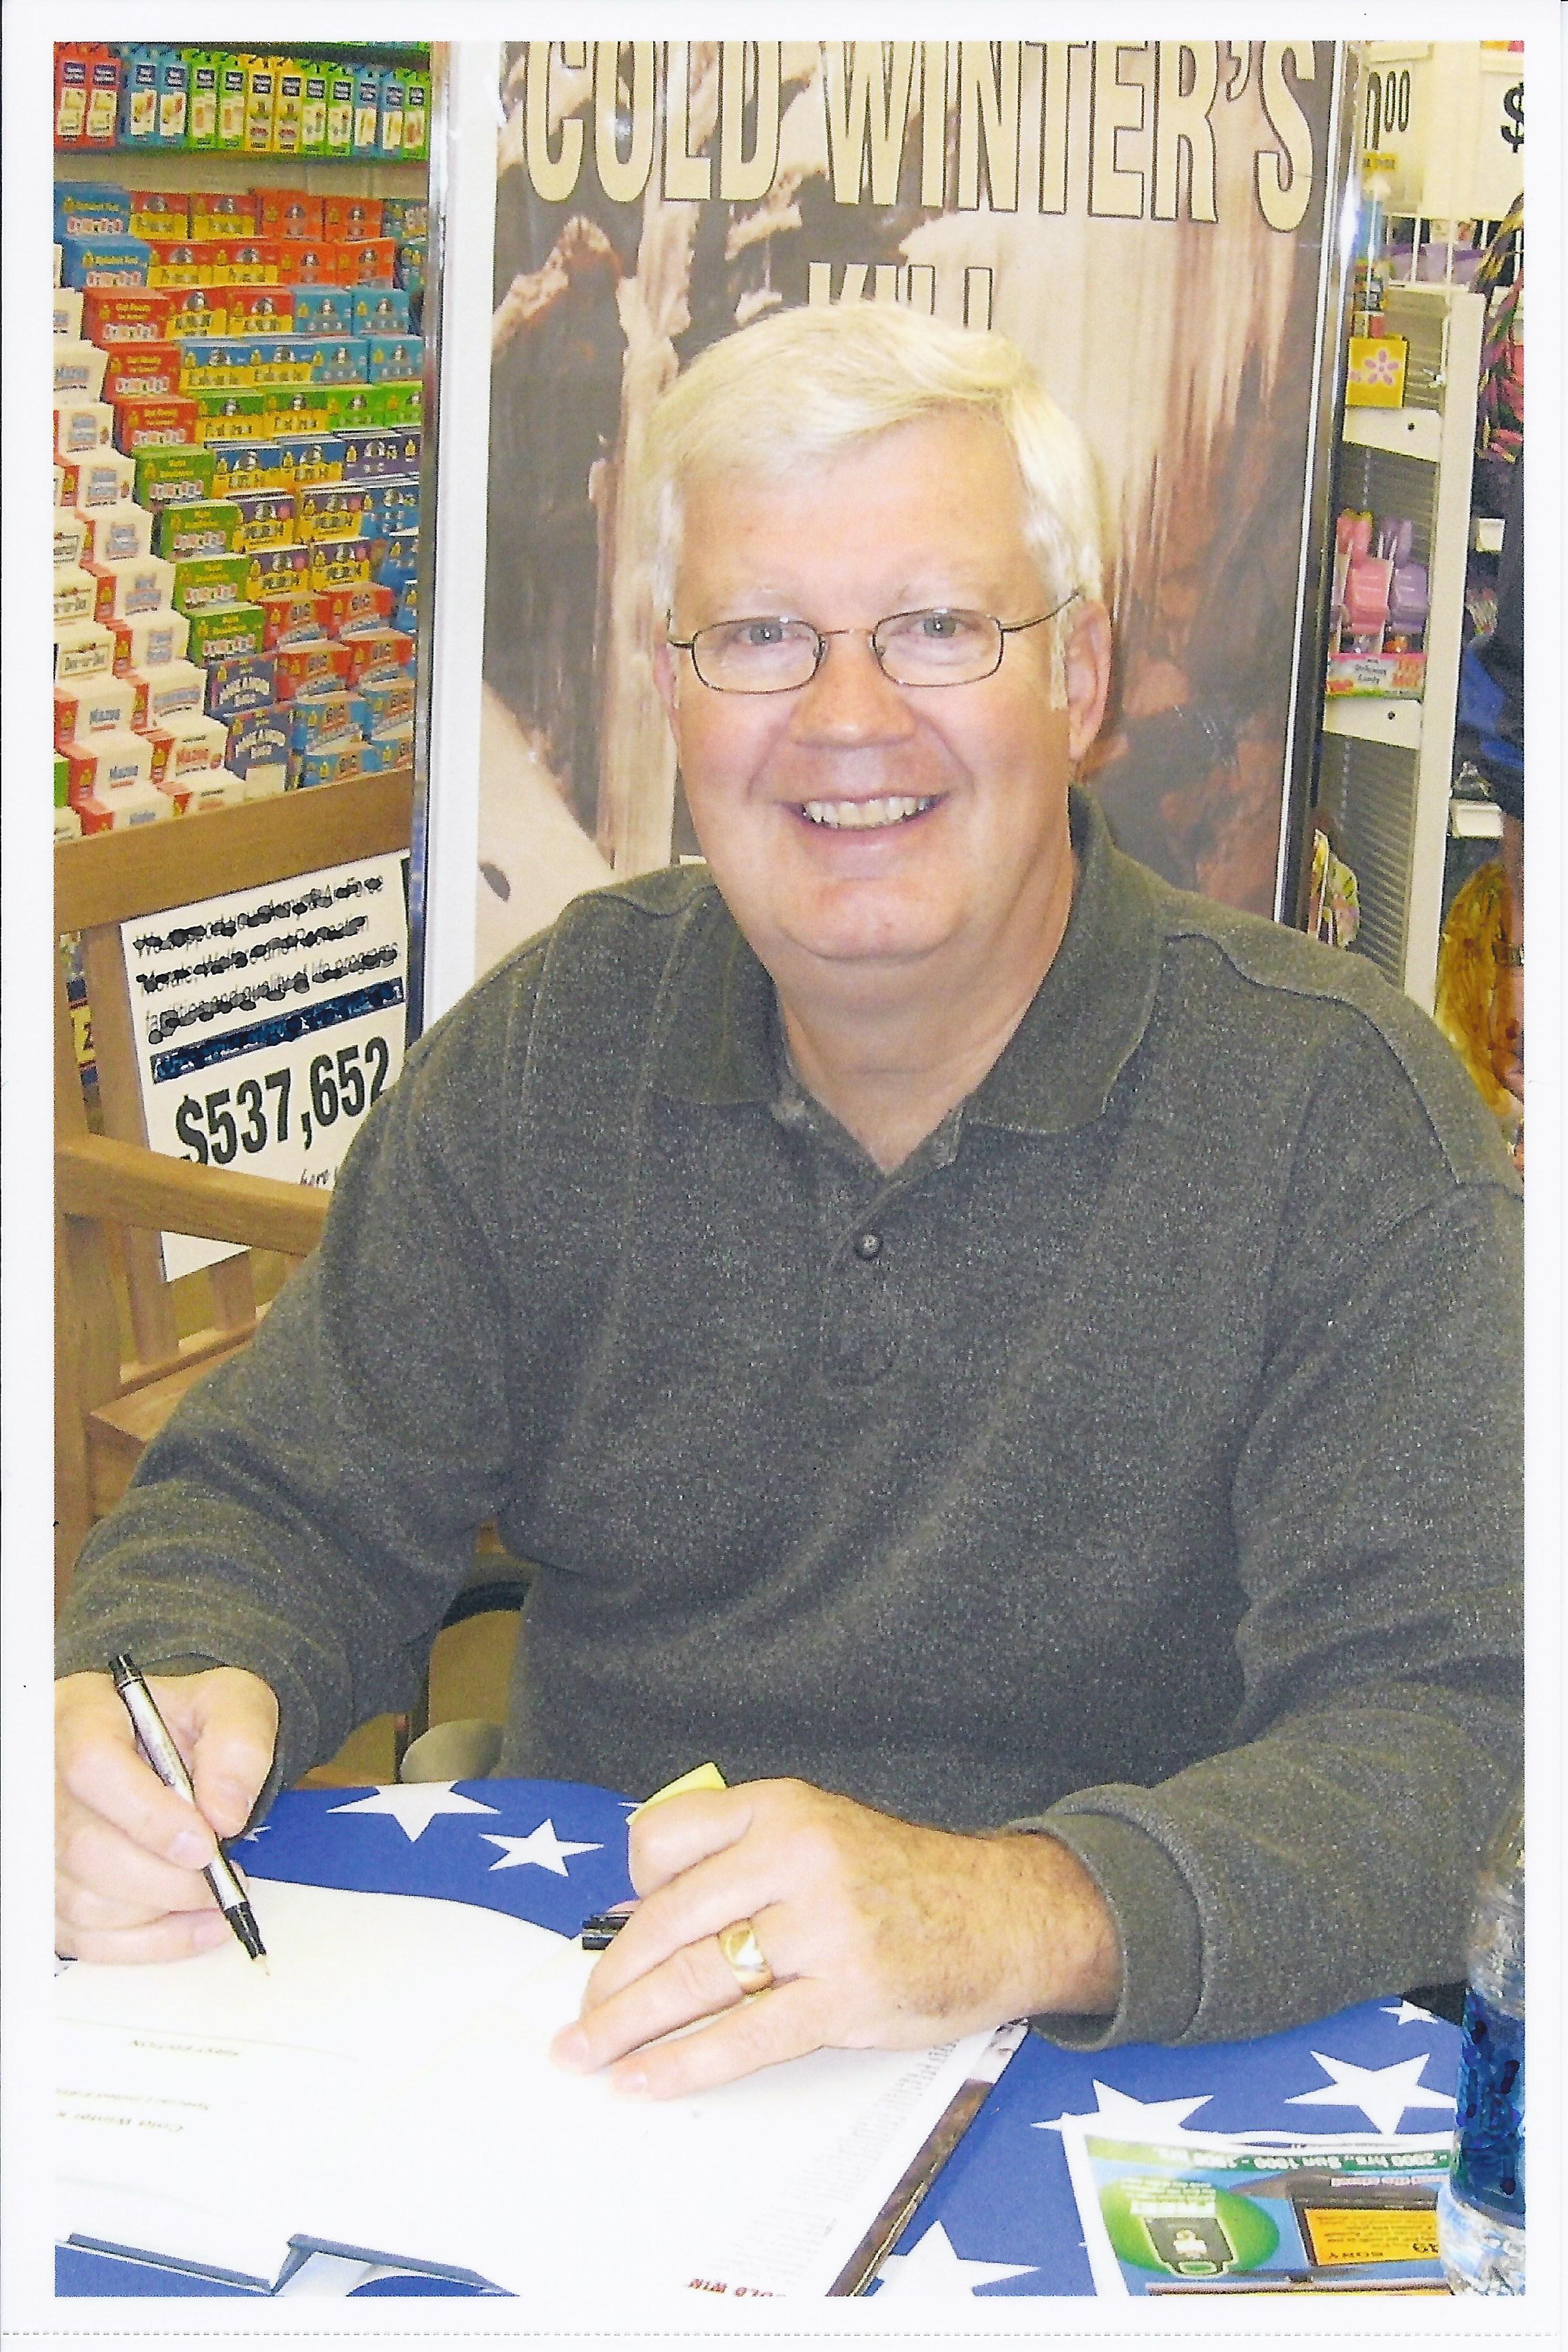 Bob Doerr, a retired Air Force officer, is now a full time author with five mystery/thrillers already published.